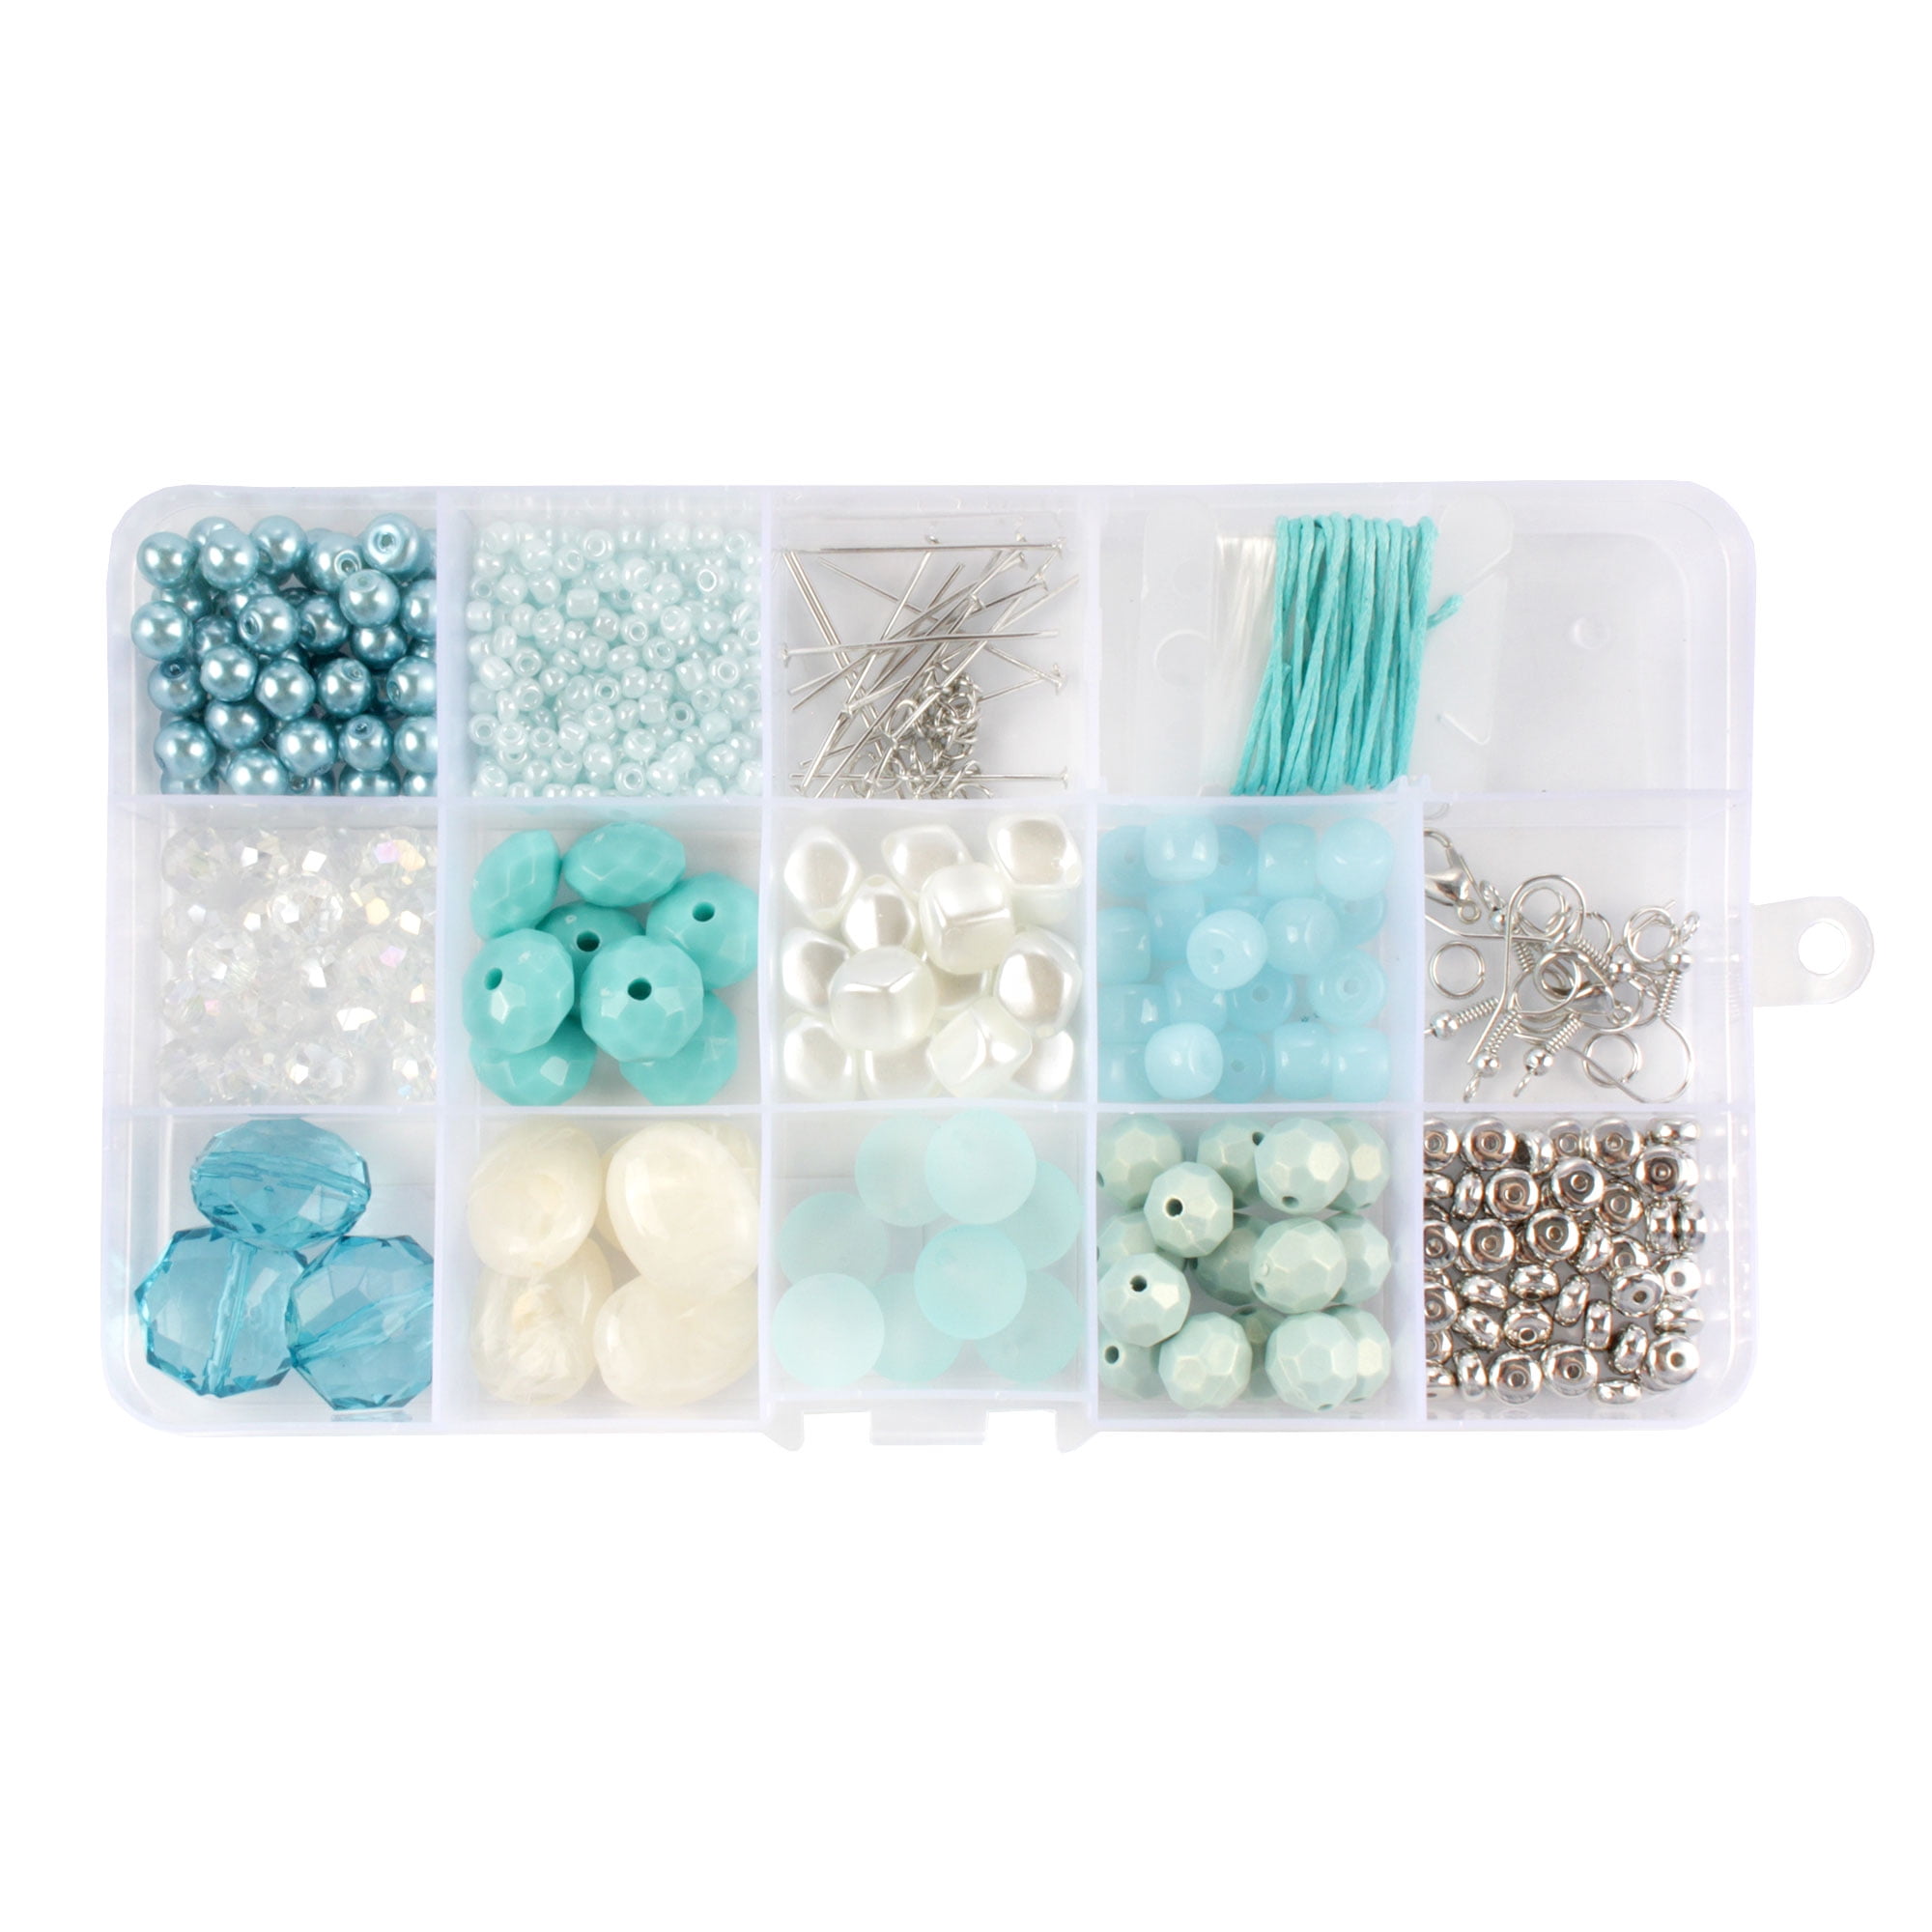 1,200 Piece Acrylic Bead Kit With Organizer Case, 24 Different Bead Styles,  Jewelry Making Set With Scissors, Findings & More, DIY Beading 